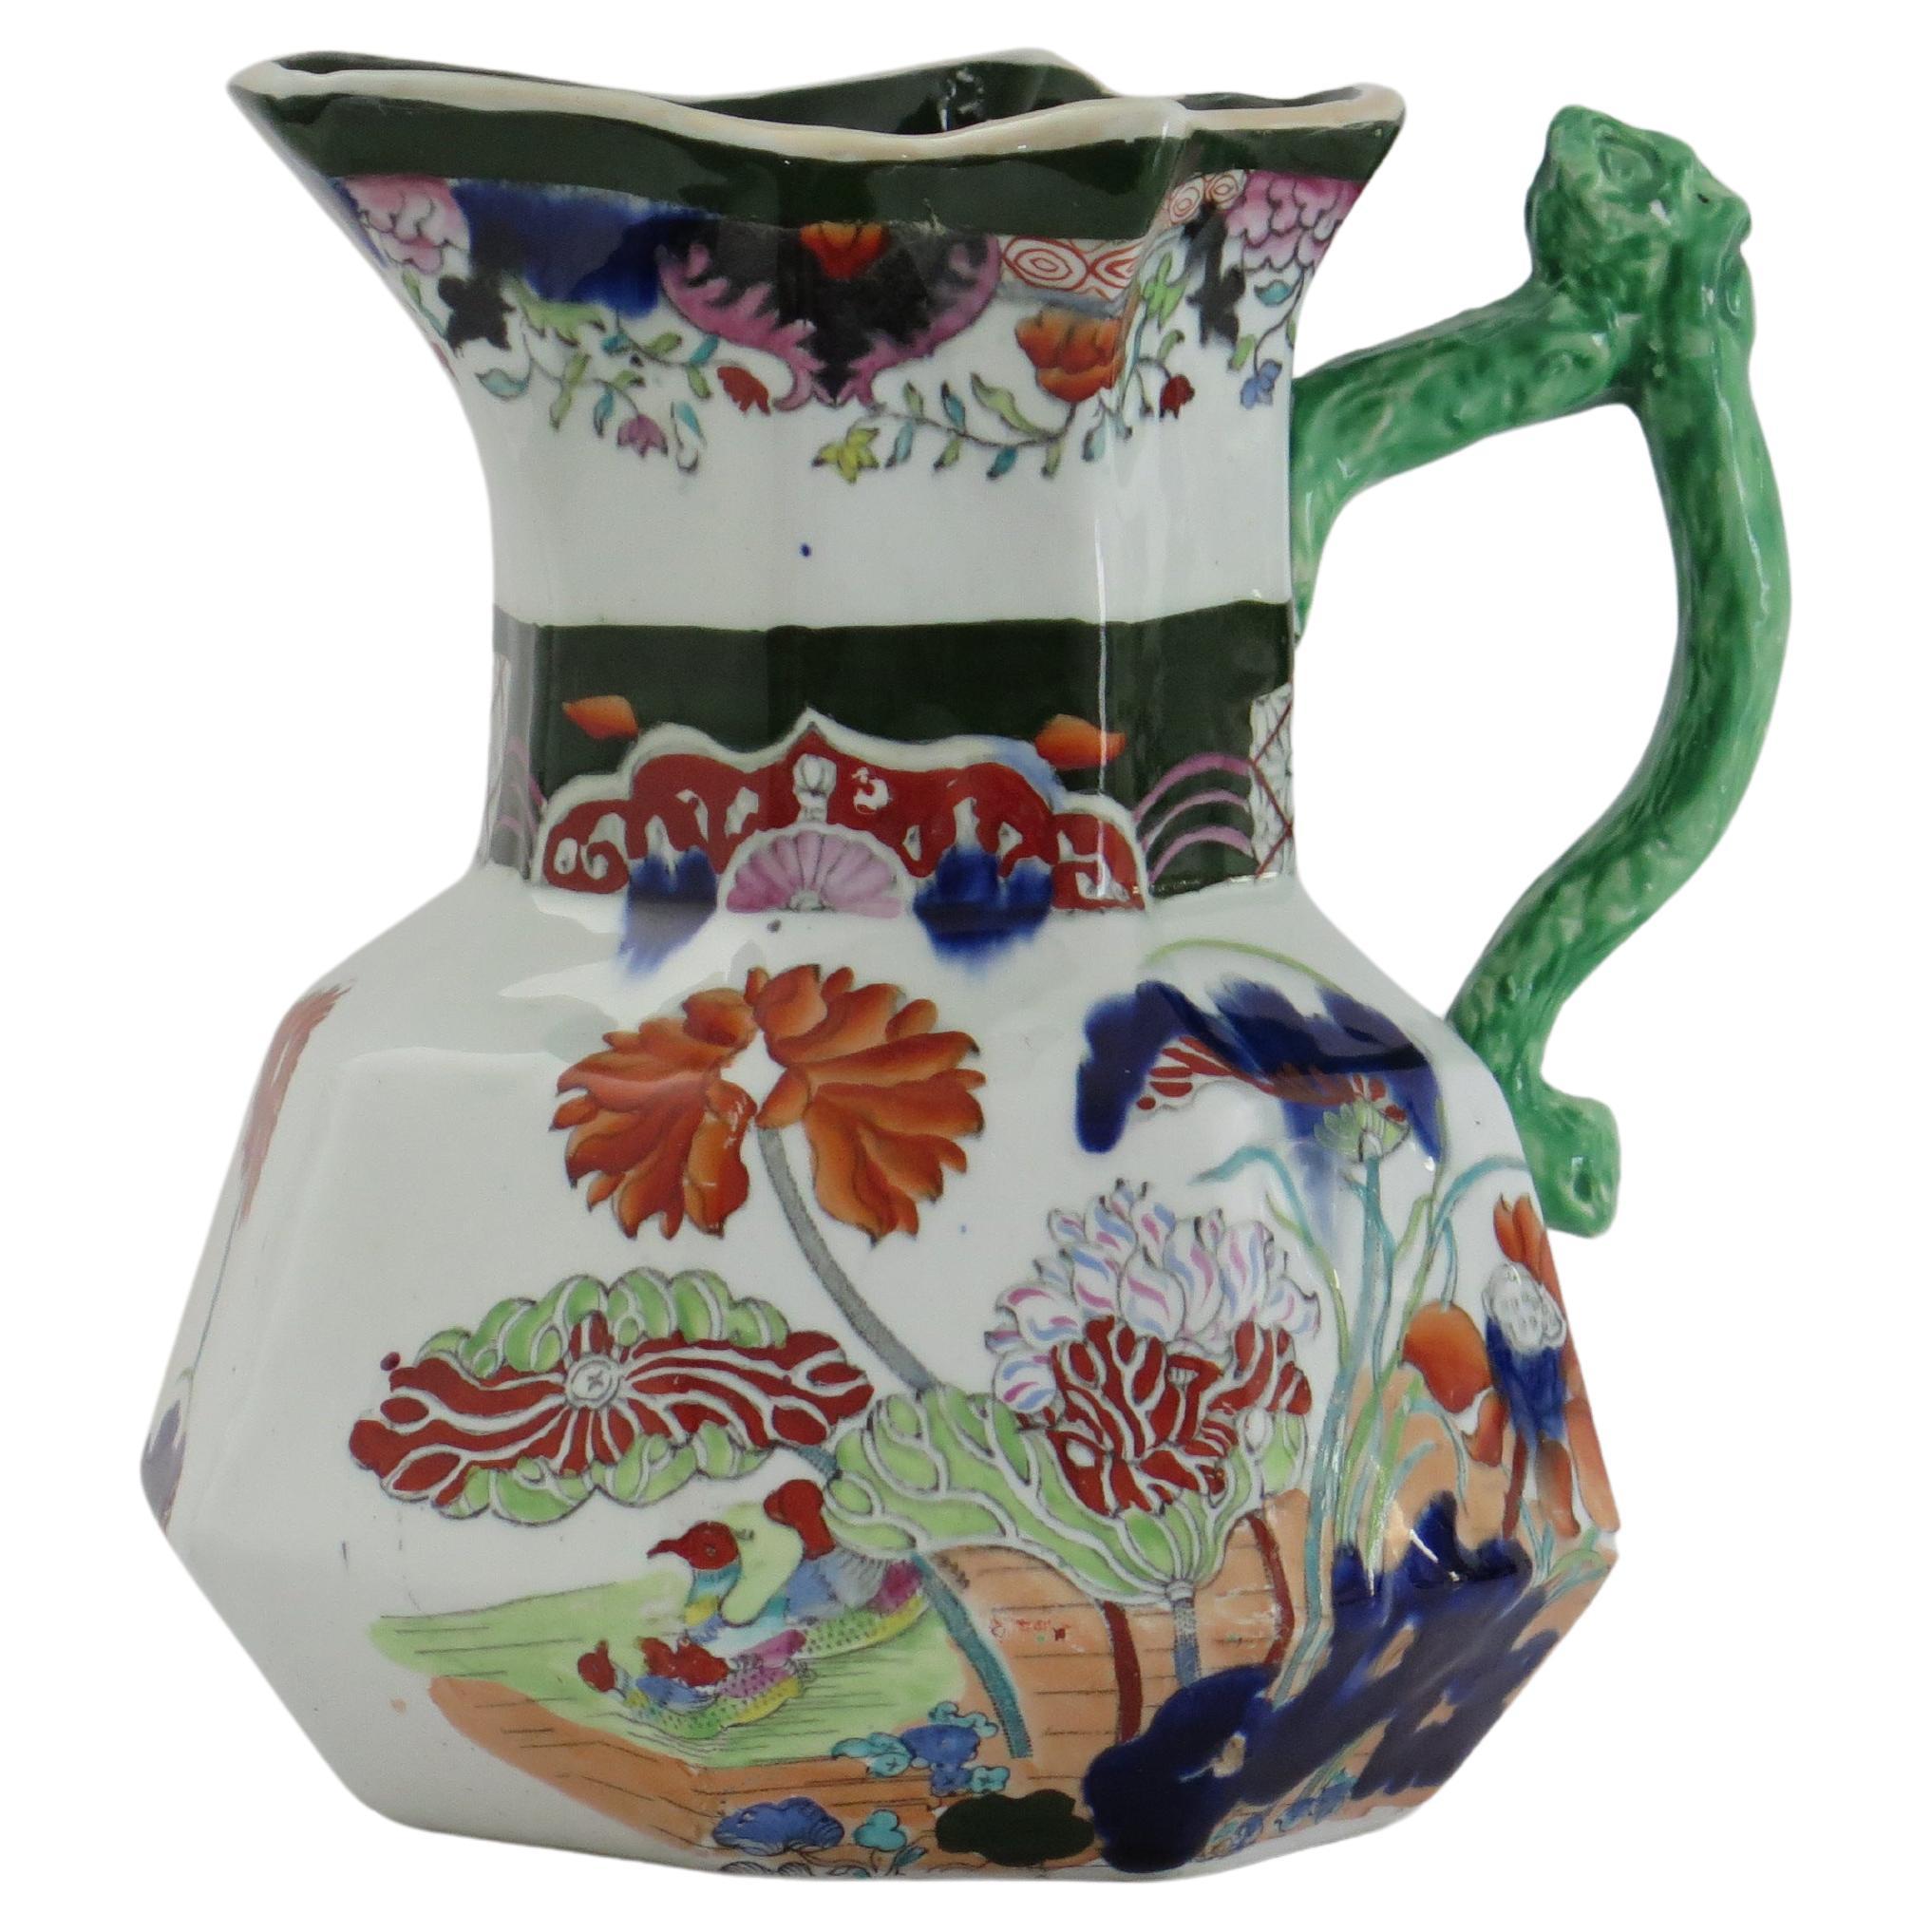 Mason's Ironstone Large Jug or Pitcher in rare Muscove Duck Pattern, circa 1825